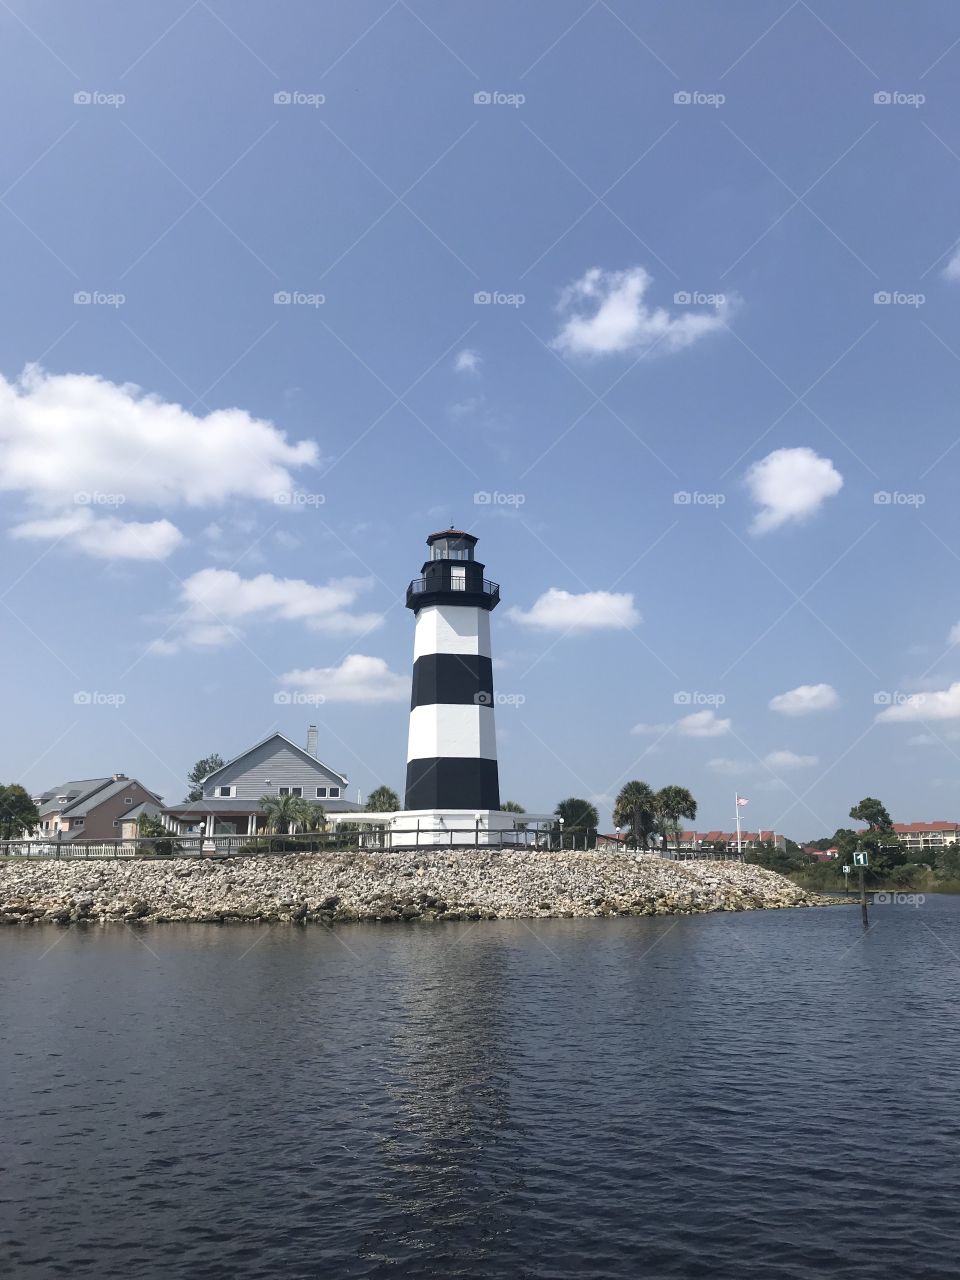 A gorgeous summer day at the Little River marina in between South and North Carolina. The cute lighthouse stands out among the smaller structures nearby.